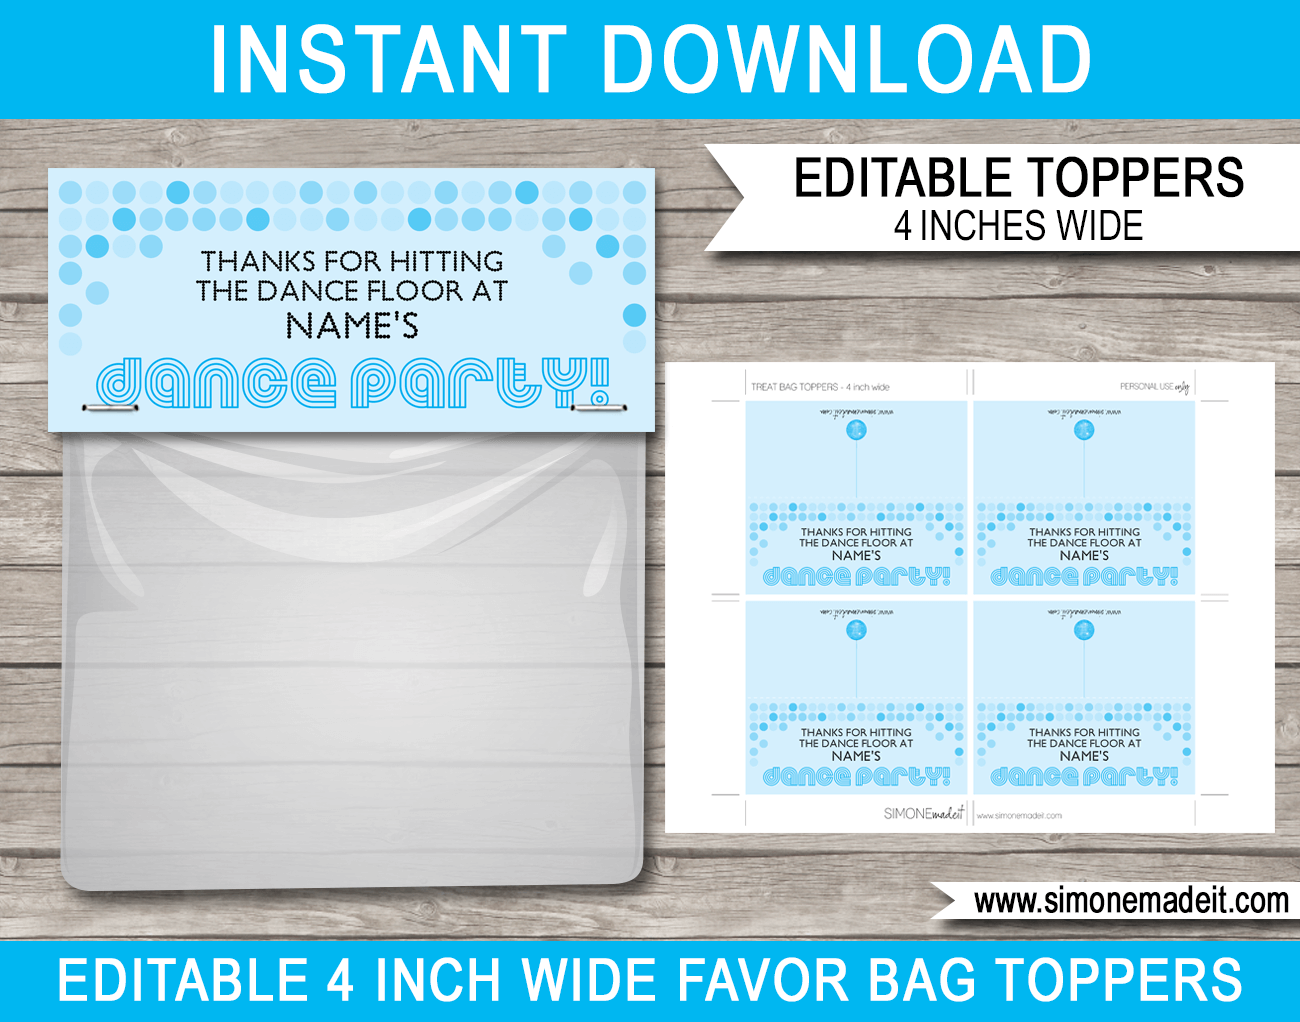 Blue Printable Dance Party Favor Bag Toppers | Birthday Party | Editable DIY Template | $3.00 INSTANT DOWNLOAD via SIMONEmadeit.com